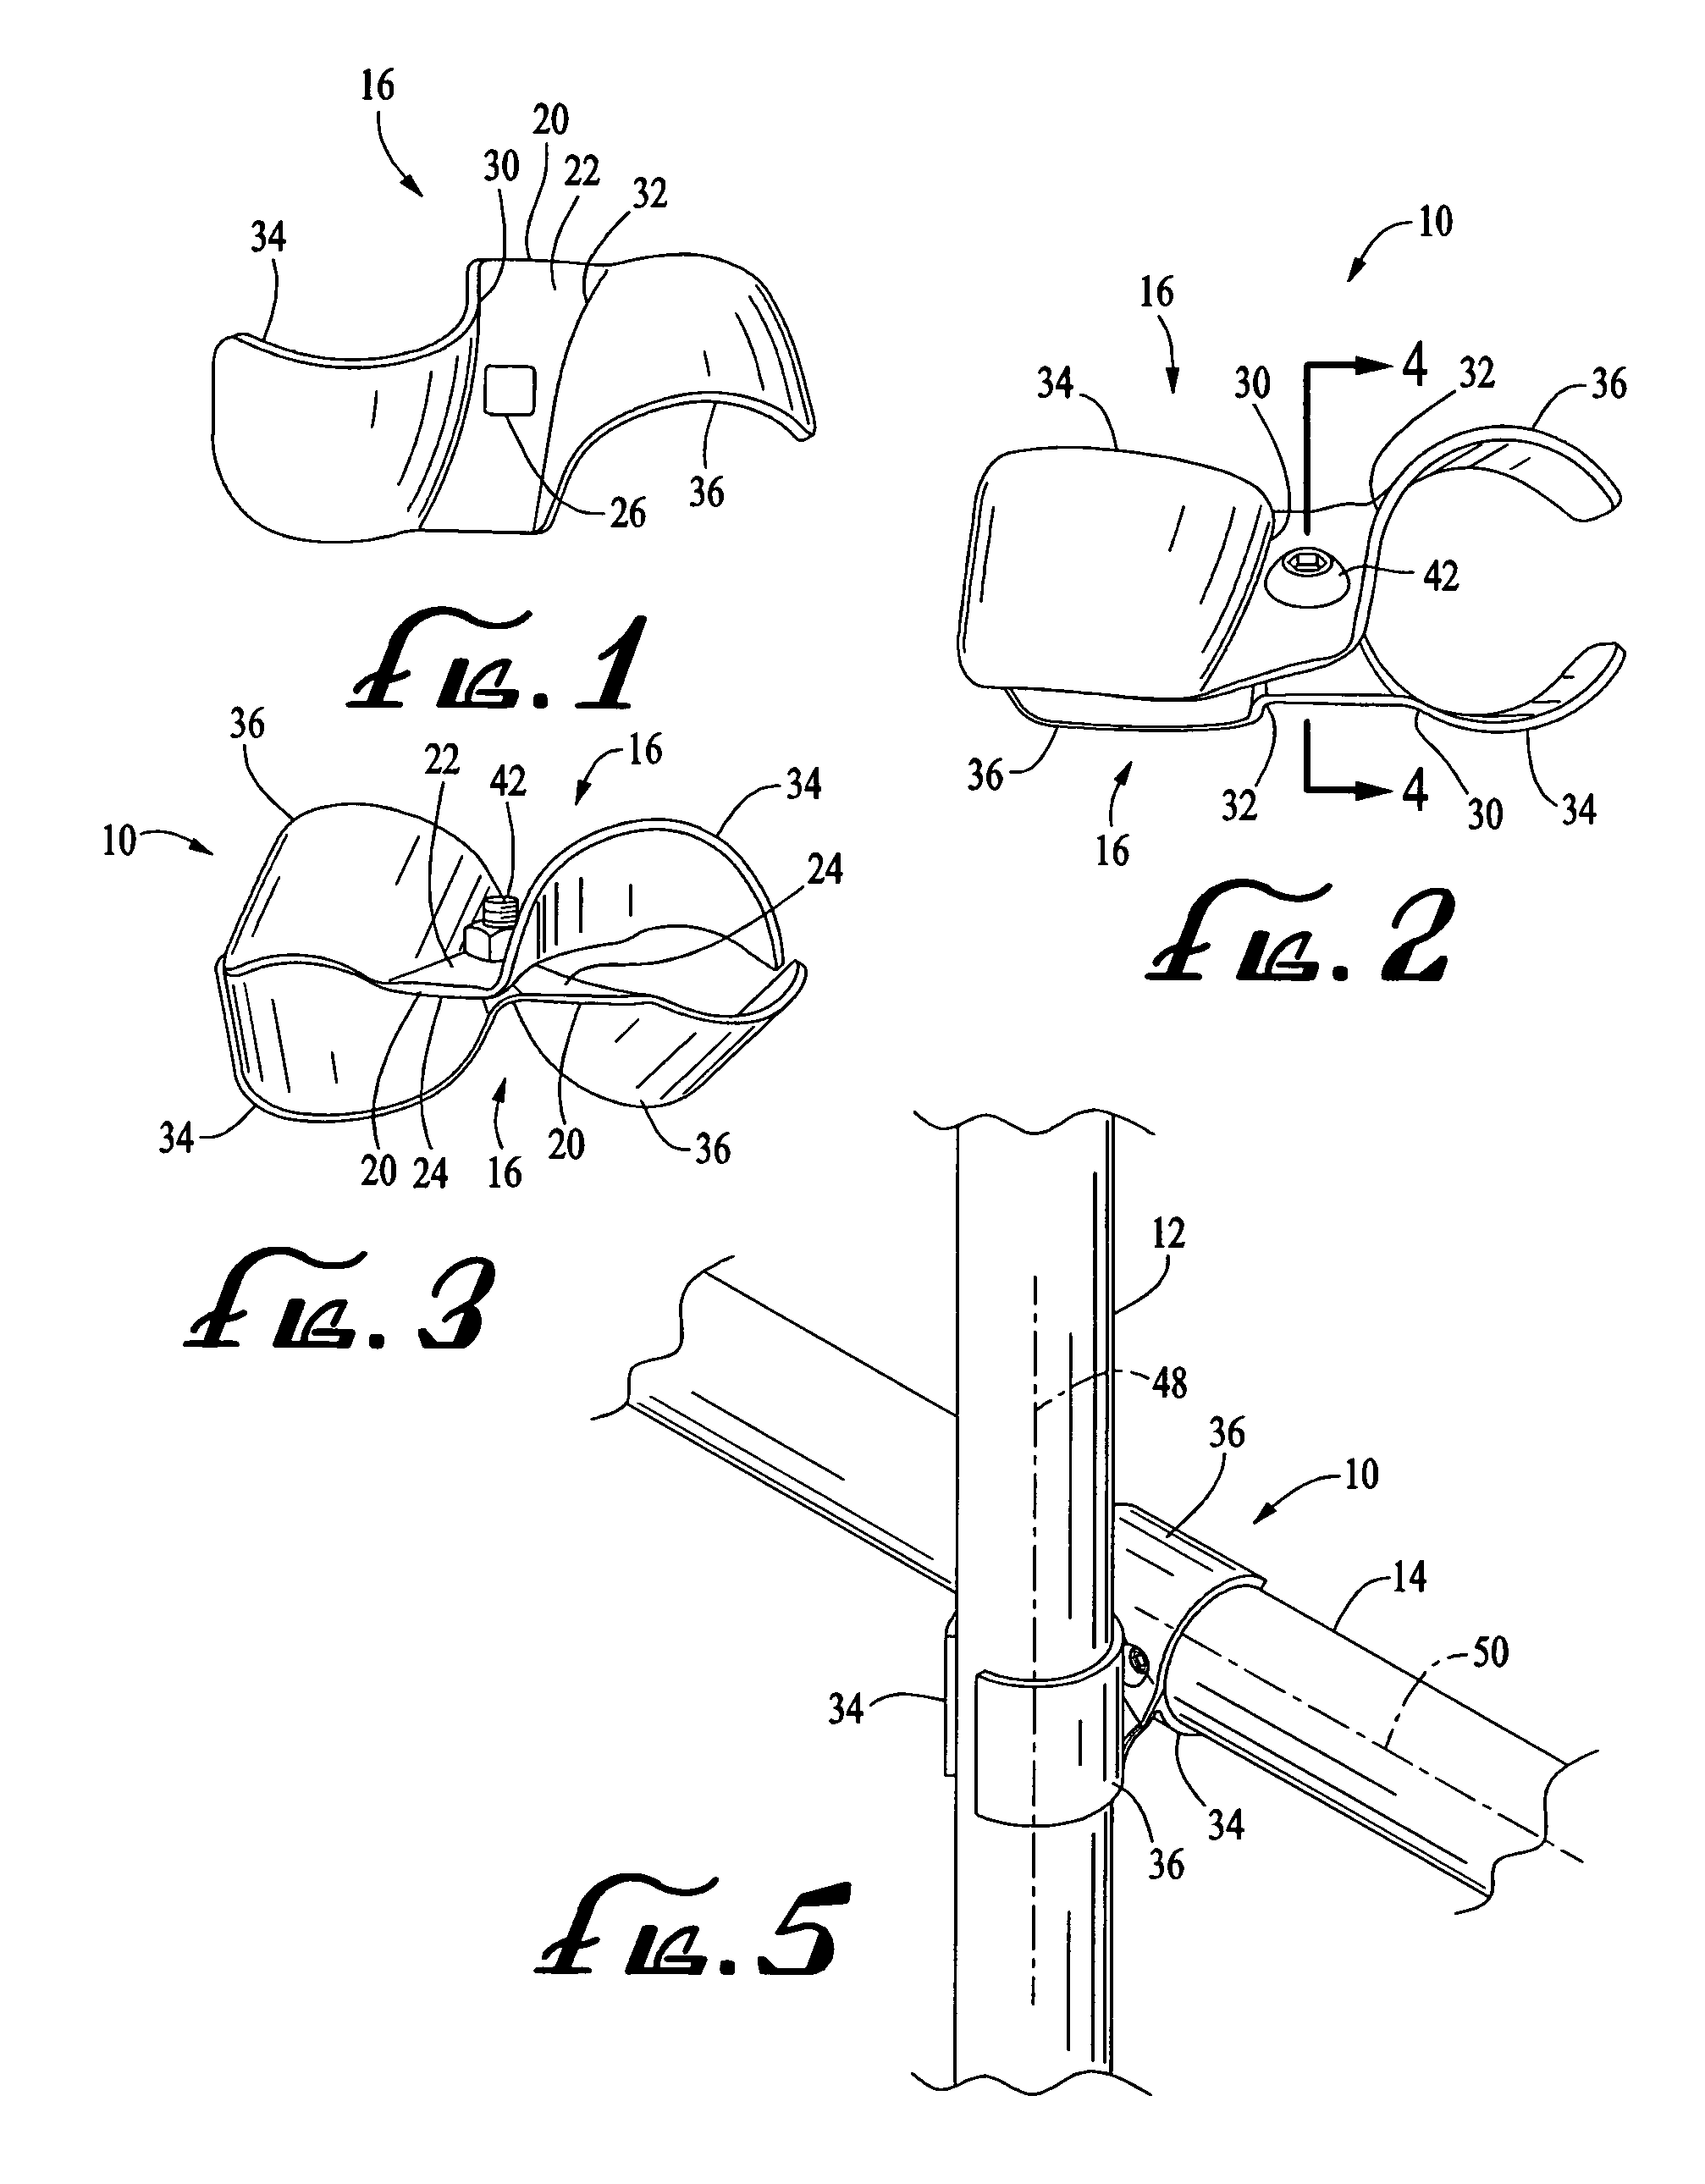 Clamp for interconnecting orthogonally oriented pipes